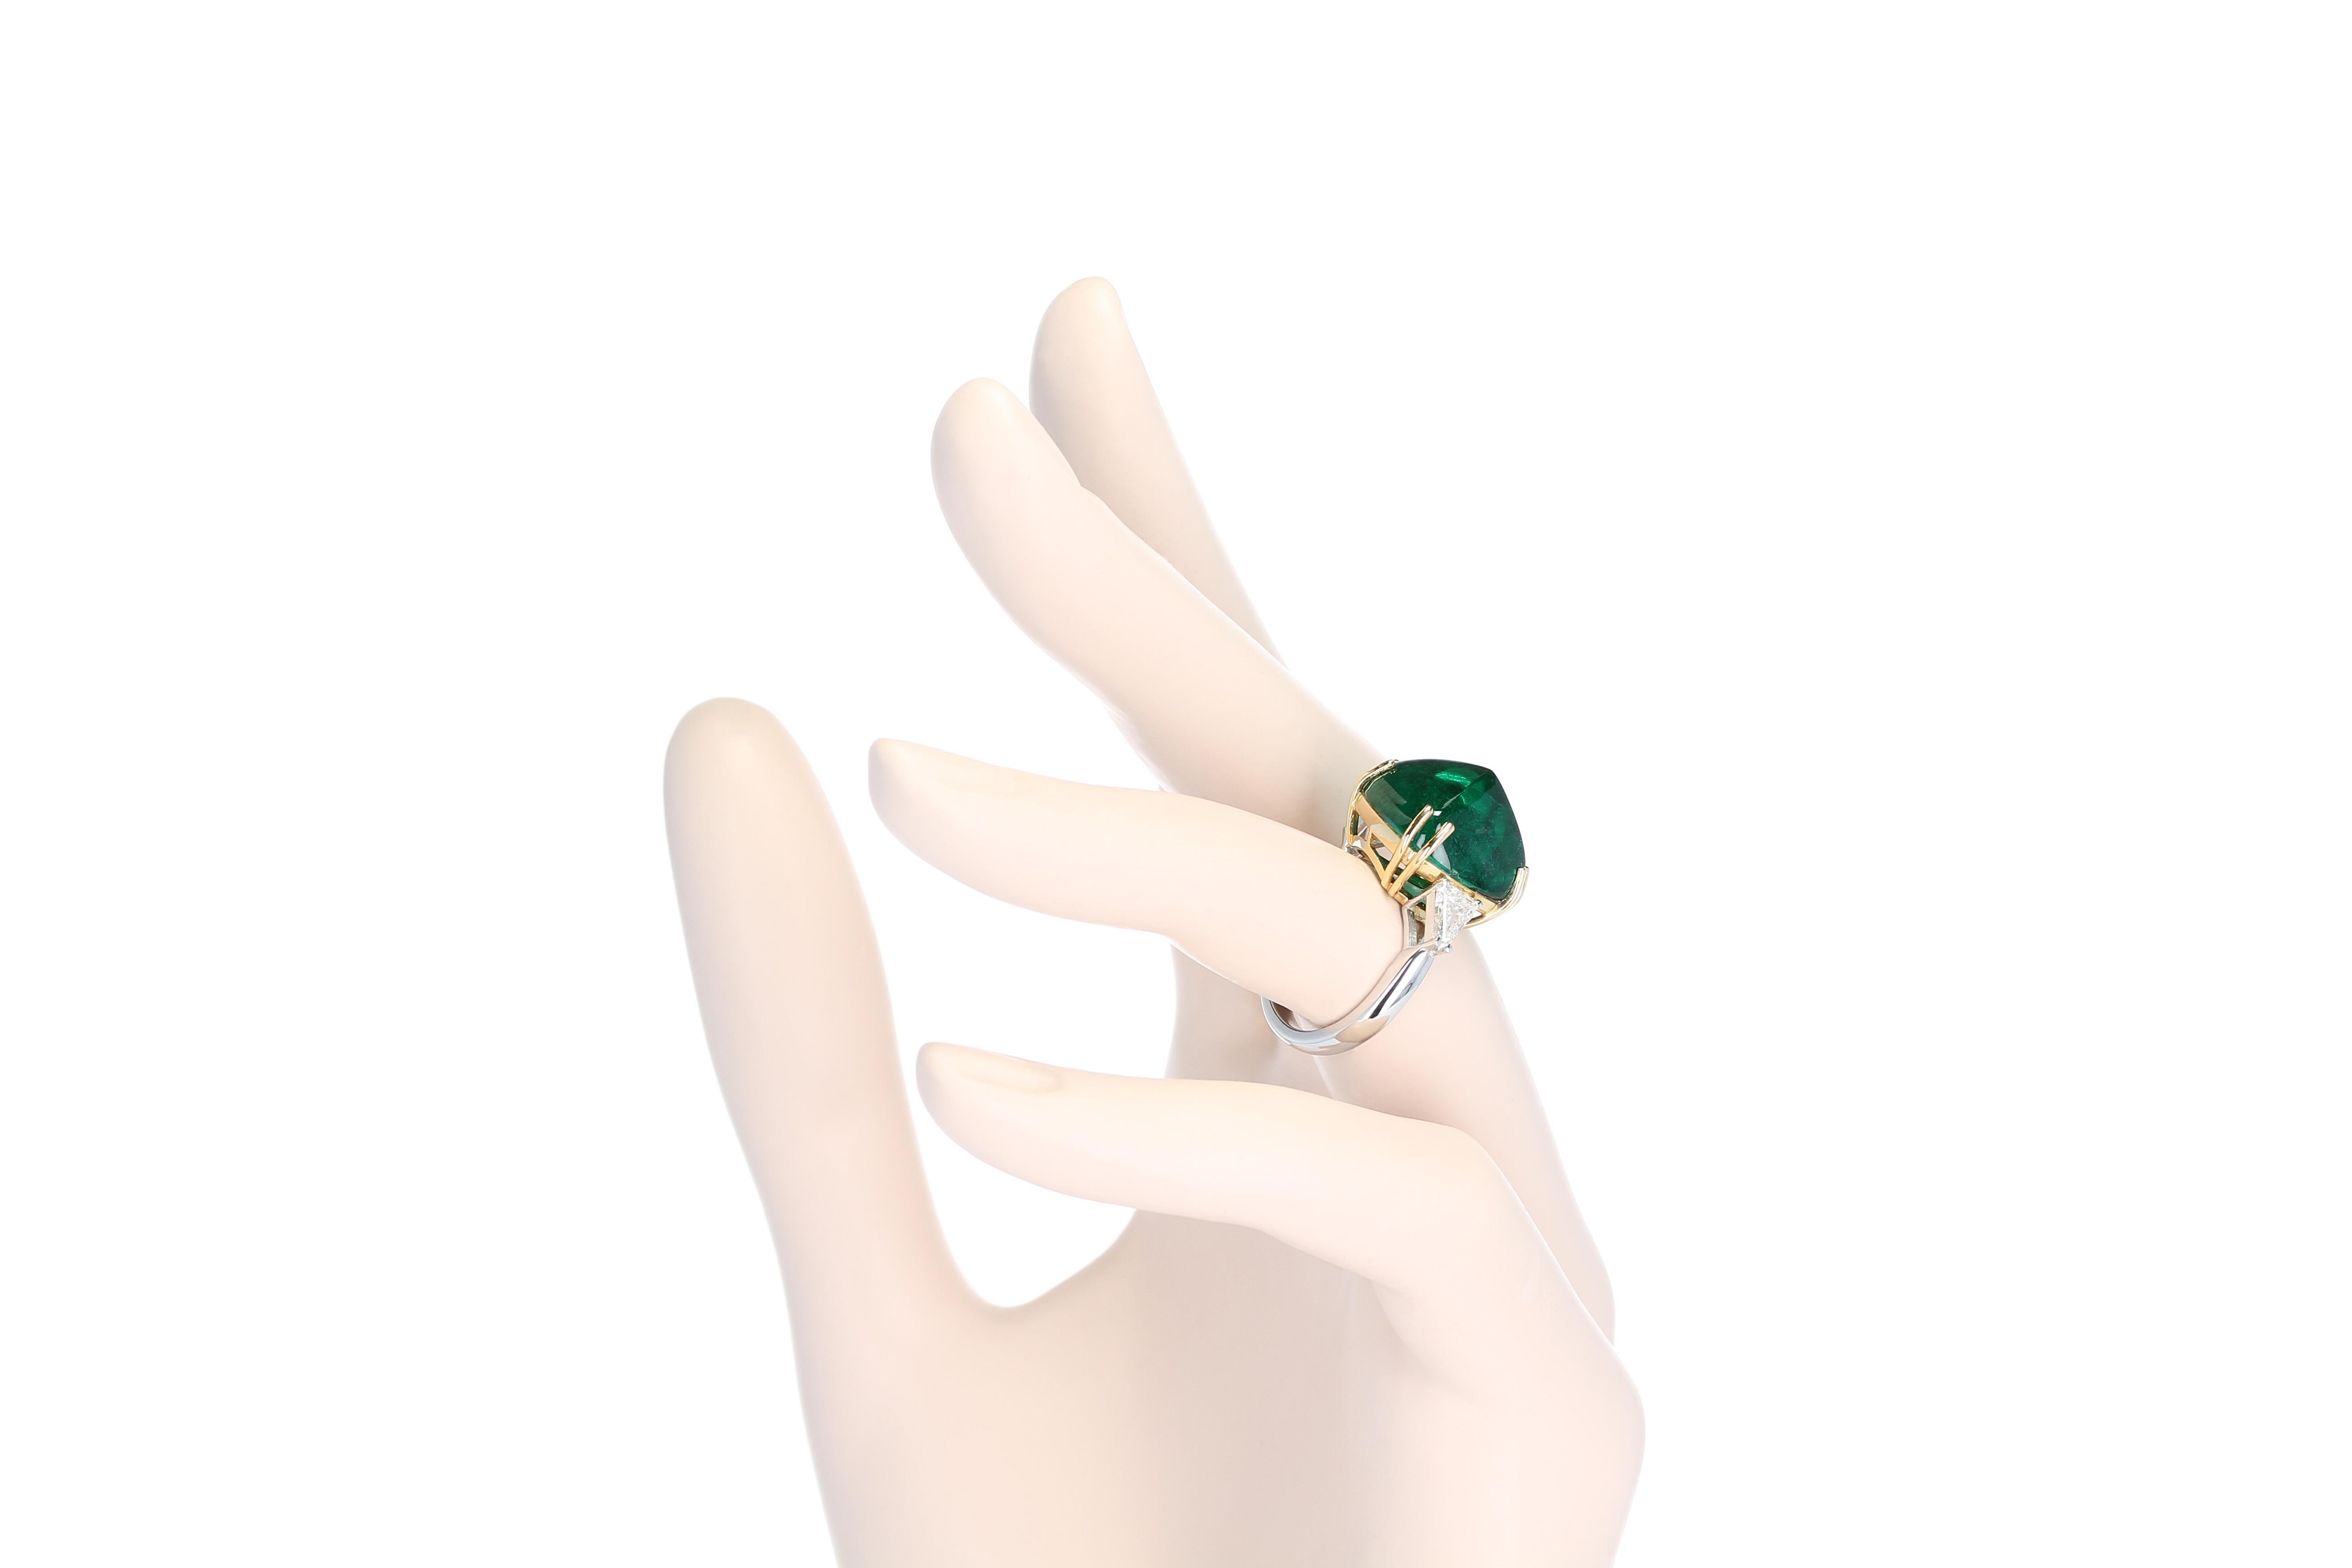 A stunning ring centered with a 17.53 carat Emerald Sugarloaf Cabochon, accented with two shield diamonds weighing approximately 0.68 carats total. The center emerald measures 14.87 x 14.83 x 11.34 mm and is accompanied by a gemological certificate